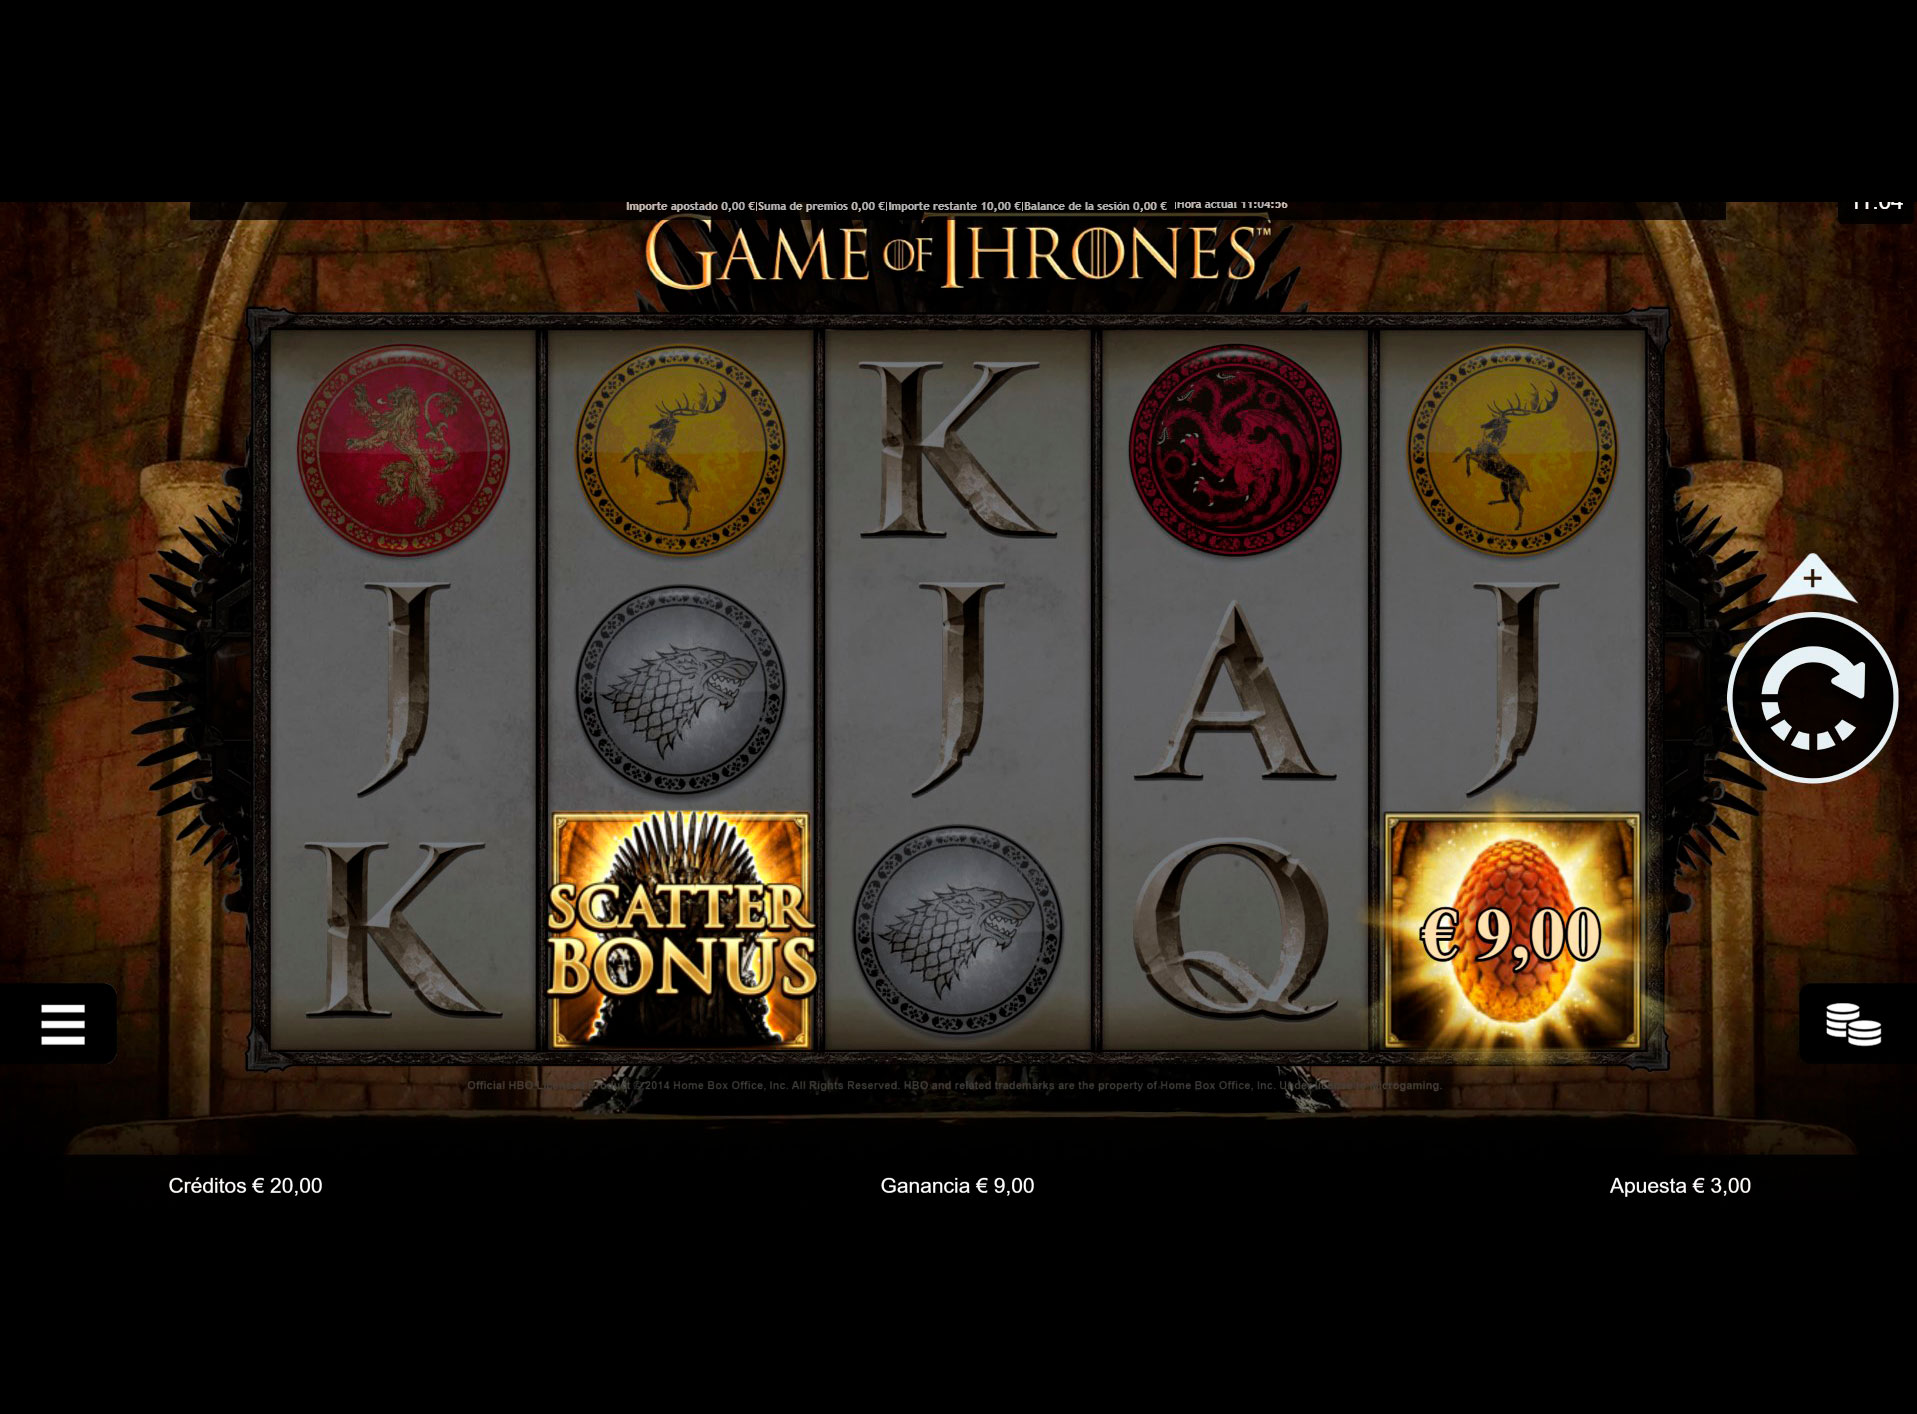 Slot Game of Thrones 15 Lines